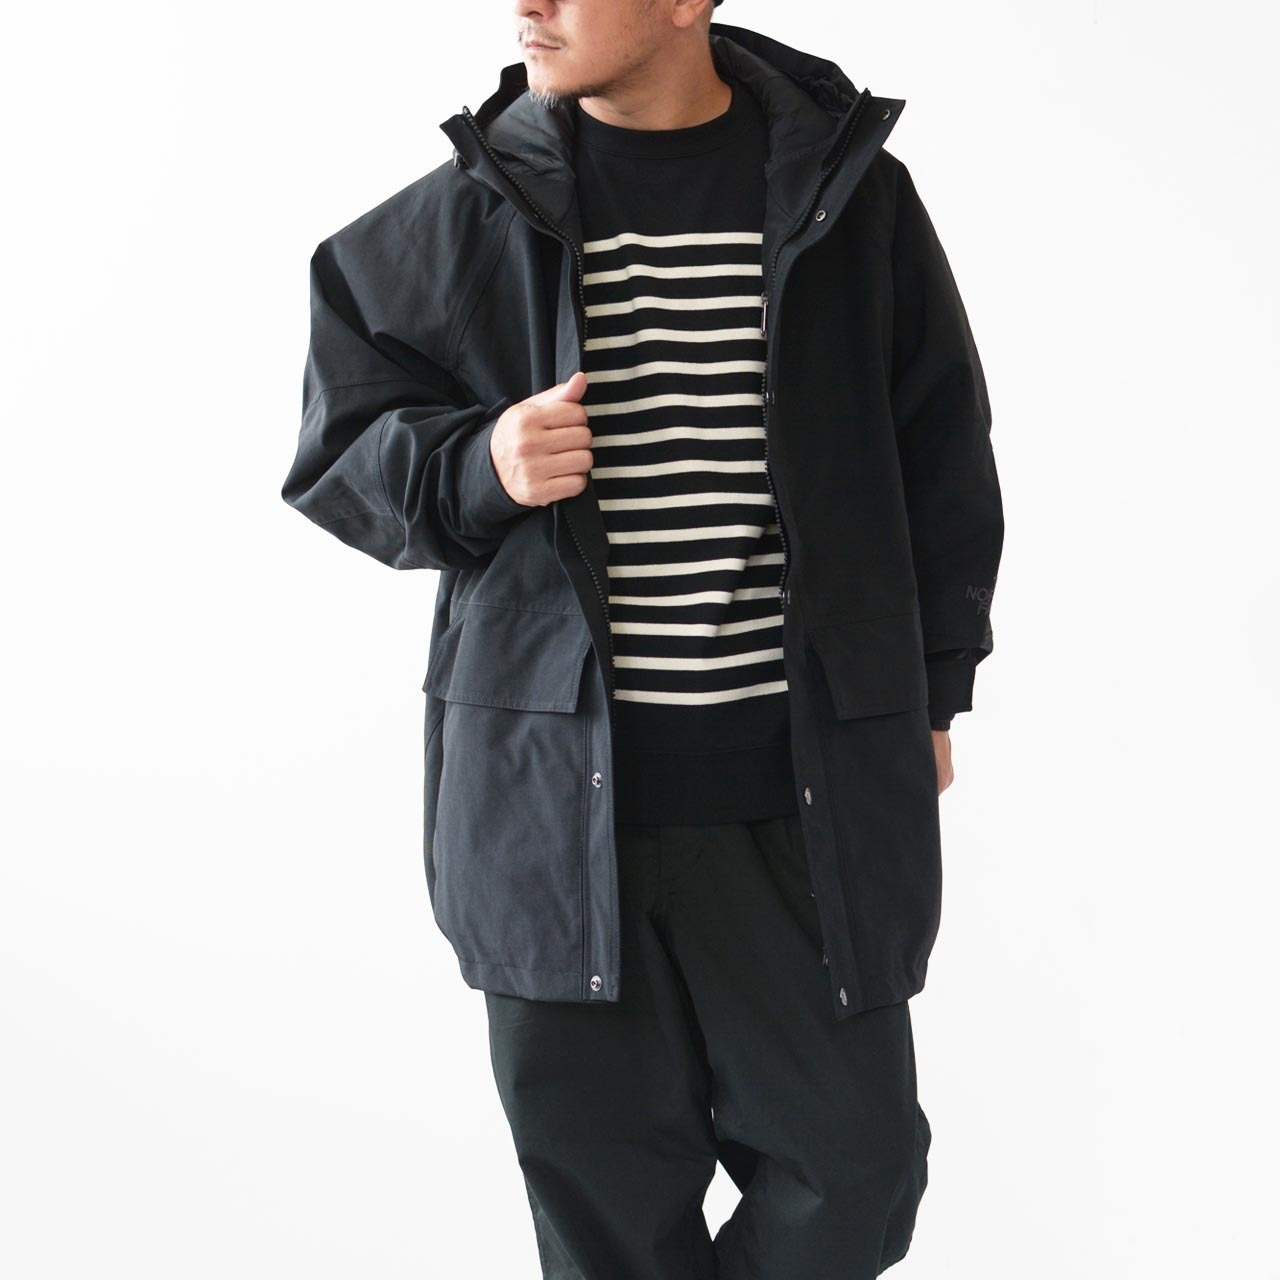 THE NORTH FACE [ザ・ノース・フェイス] Compilation Jacket [NP62360